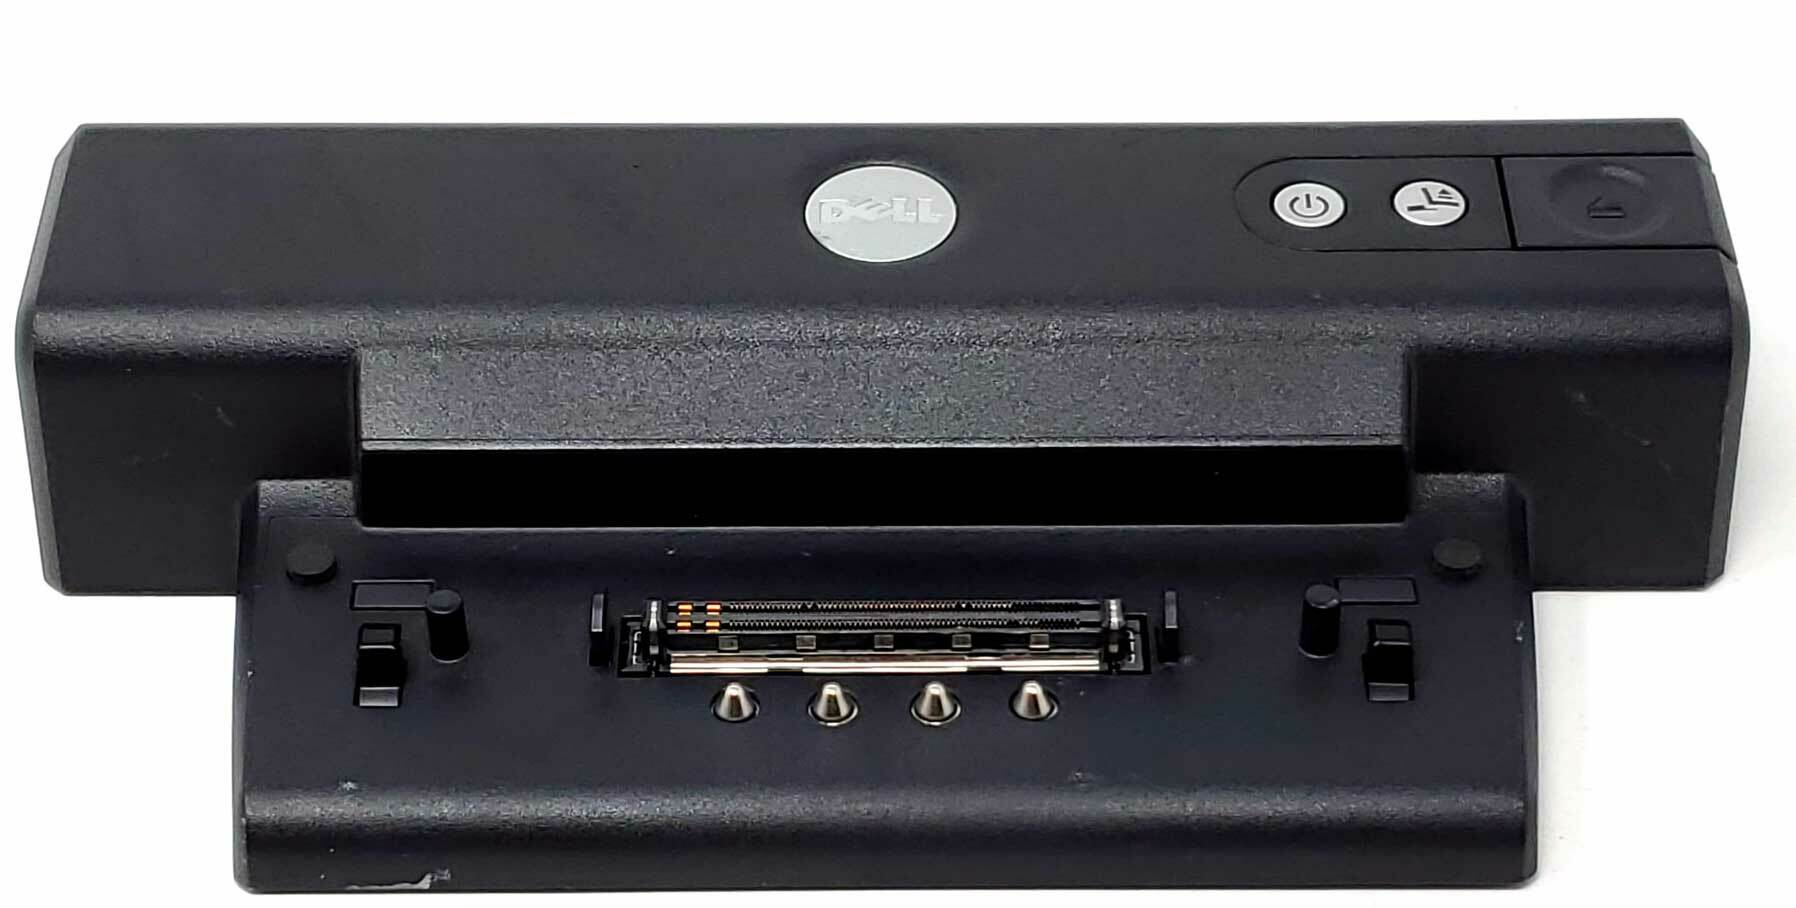 Dell D/Port Advanced Port Replicator/Docking Station - ACE Recycling